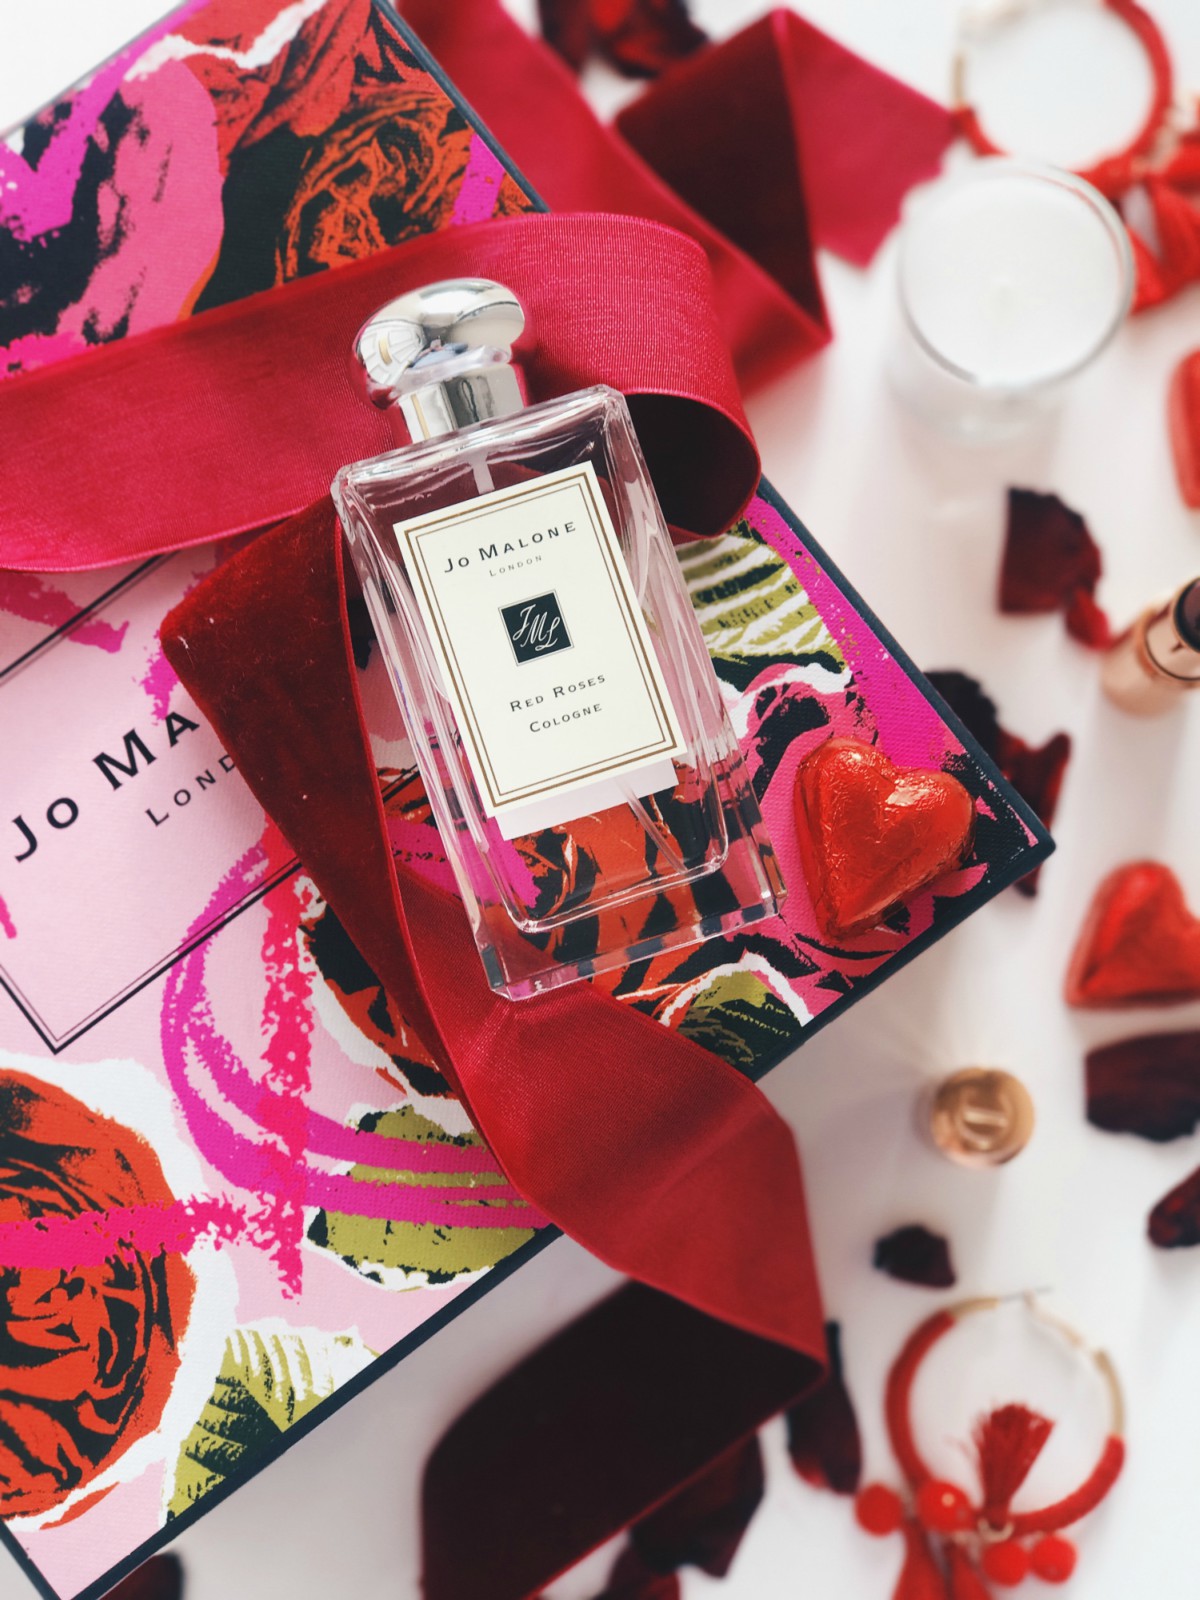 Jo Malone Red Roses Cologne Review